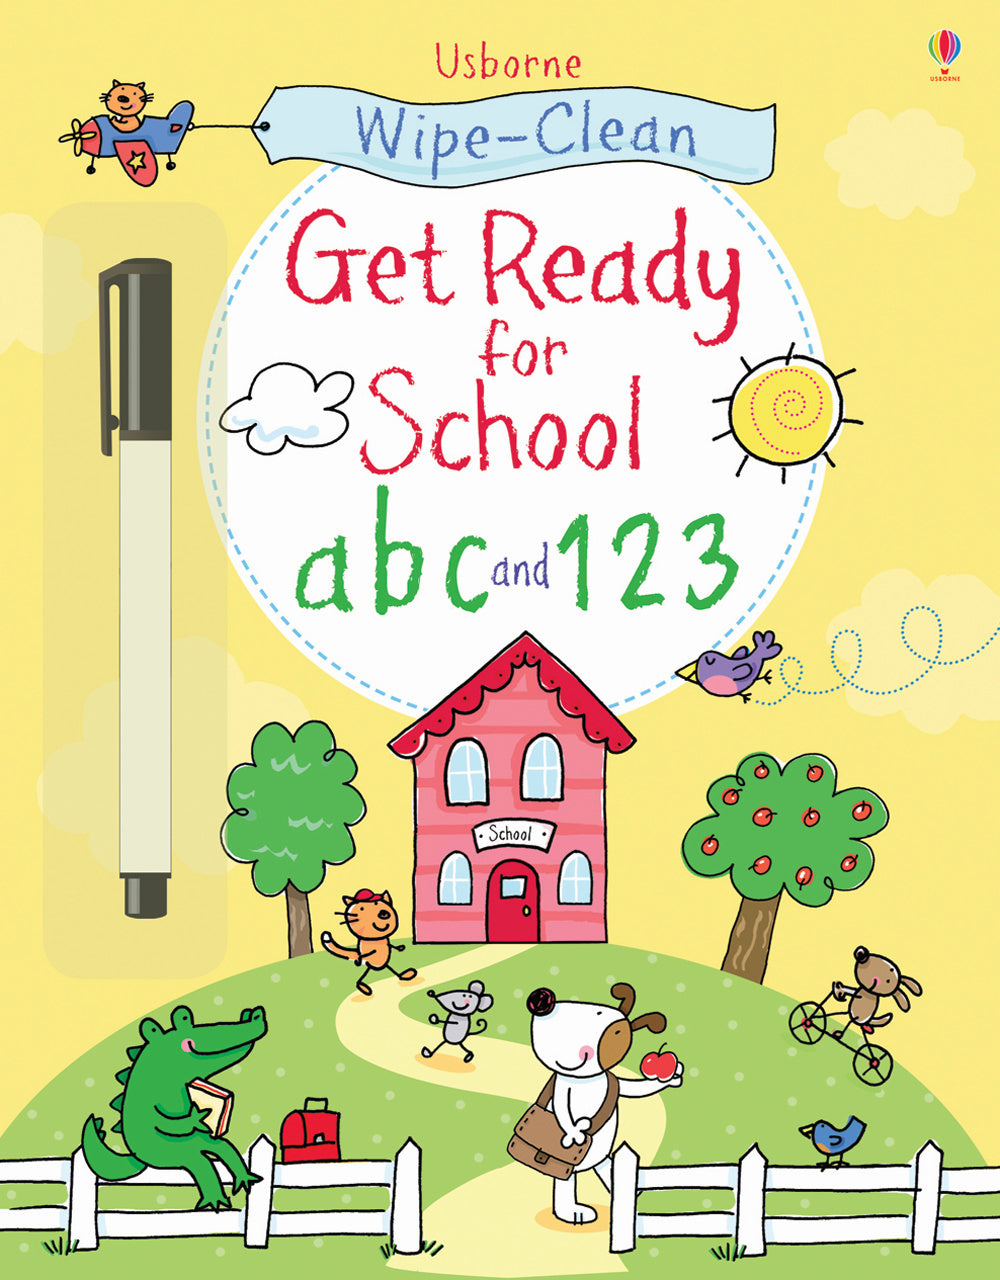 Get ready for school abc and 123.